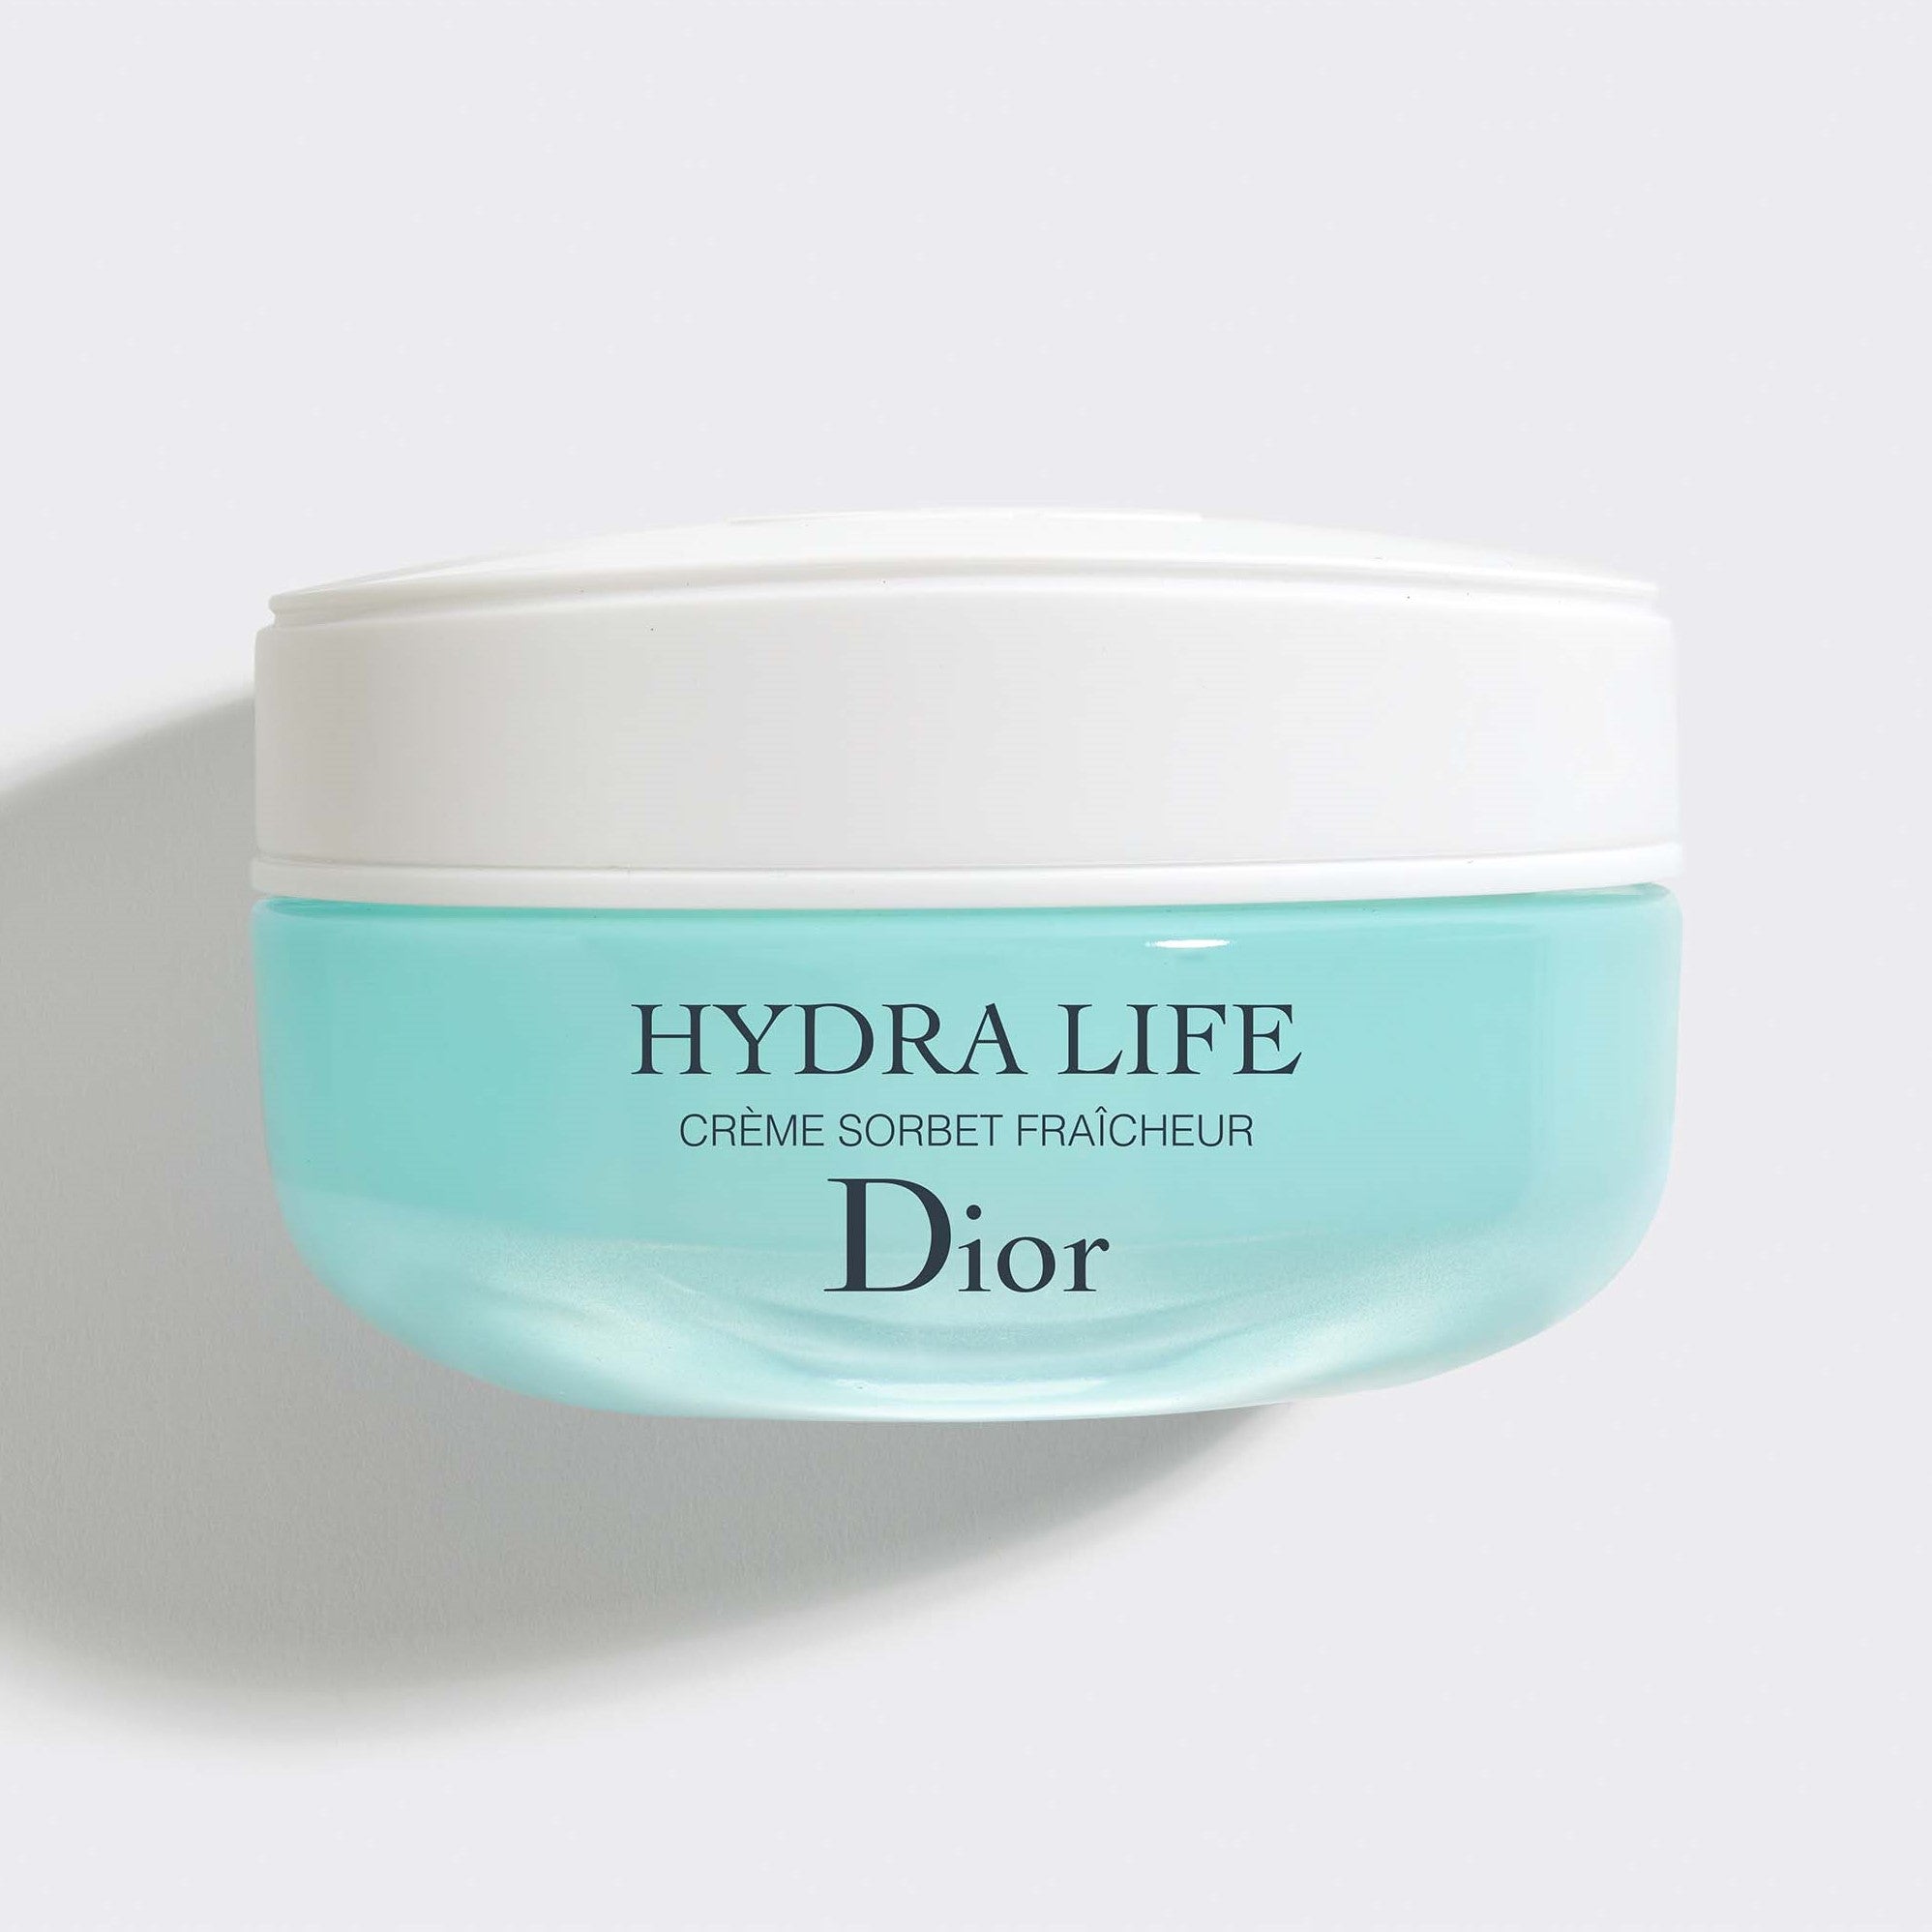 DIOR HYDRA LIFE FRESH SORBET CRÈME ~ Hydrating Face and Neck Cream - Hydrates, Plumps and Enhances